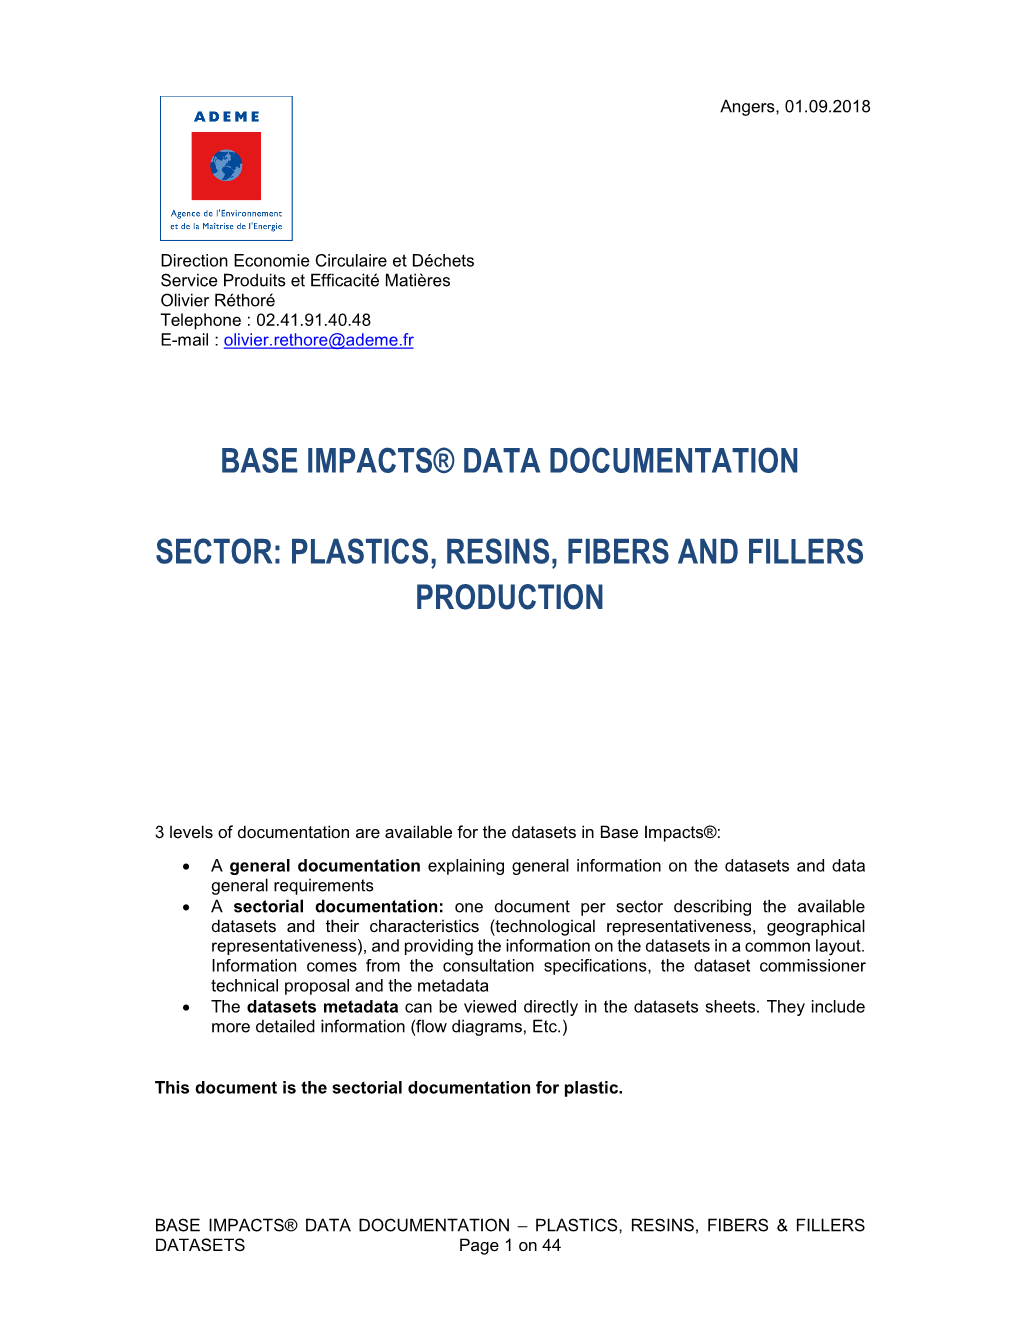 Base Impacts® Data Documentation Sector: Plastics, Resins, Fibers and Fillers Production